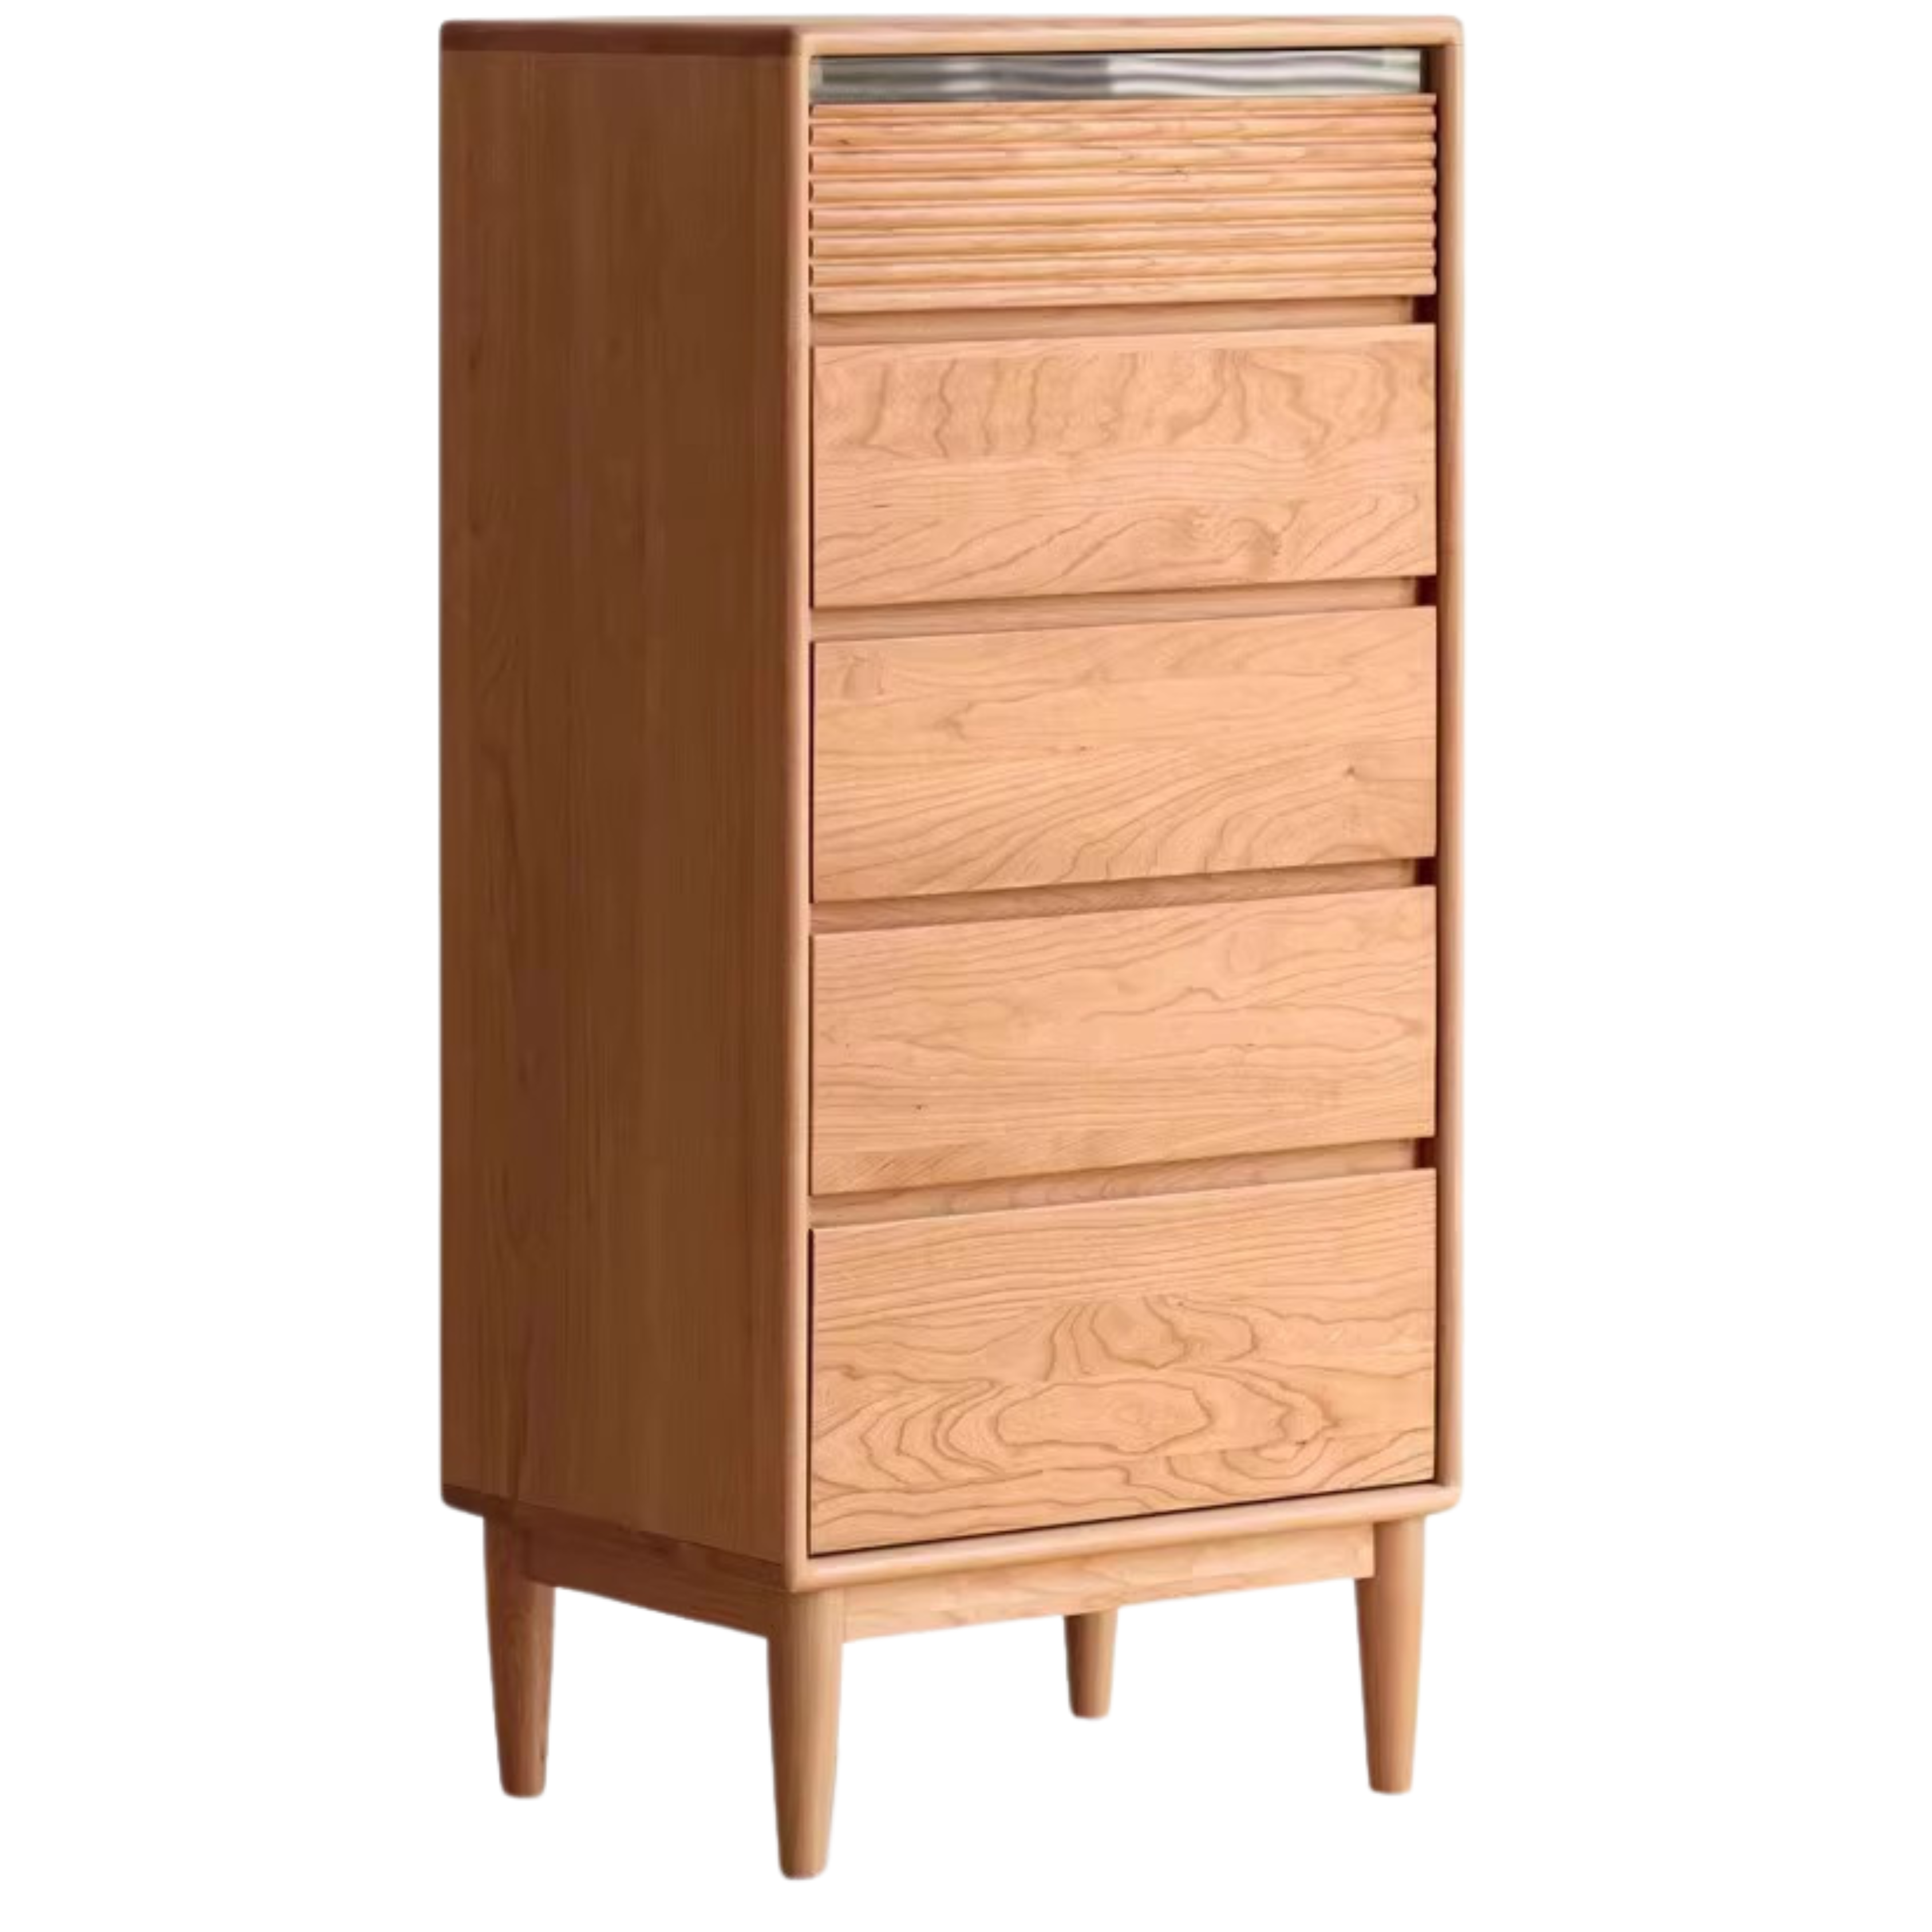 Cherry wood chest of drawers)